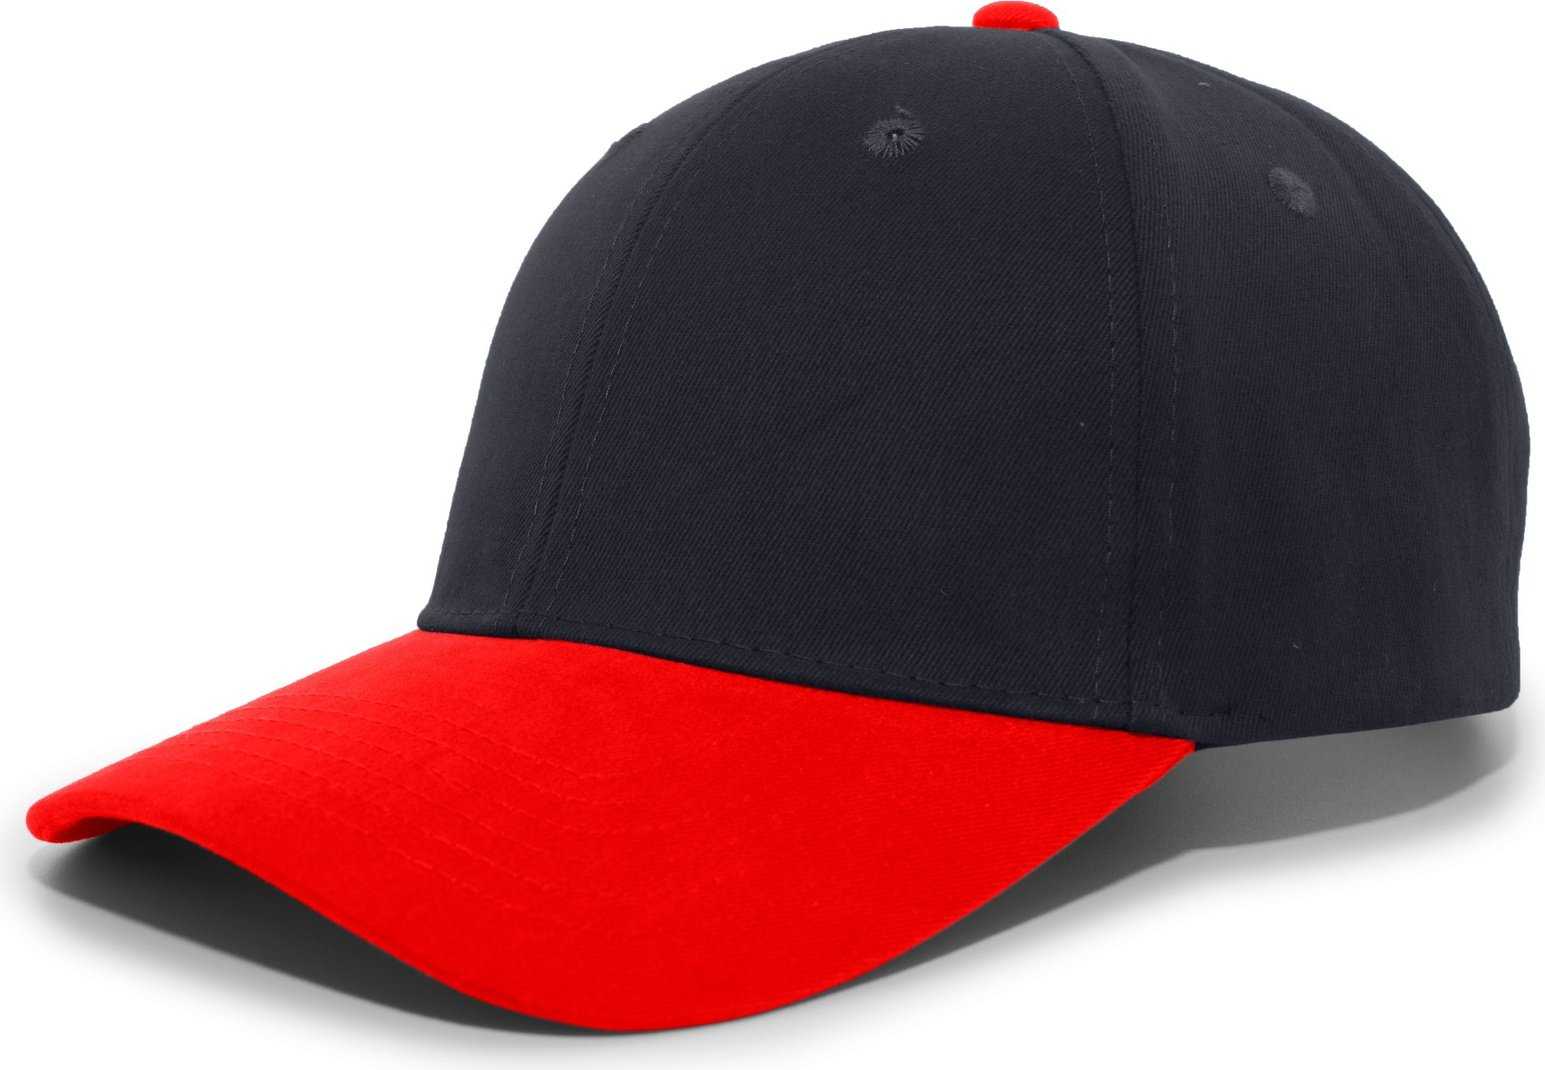 Pacific Headwear 101C Brushed Cotton Hook-and-Loop Cap - Navy Red